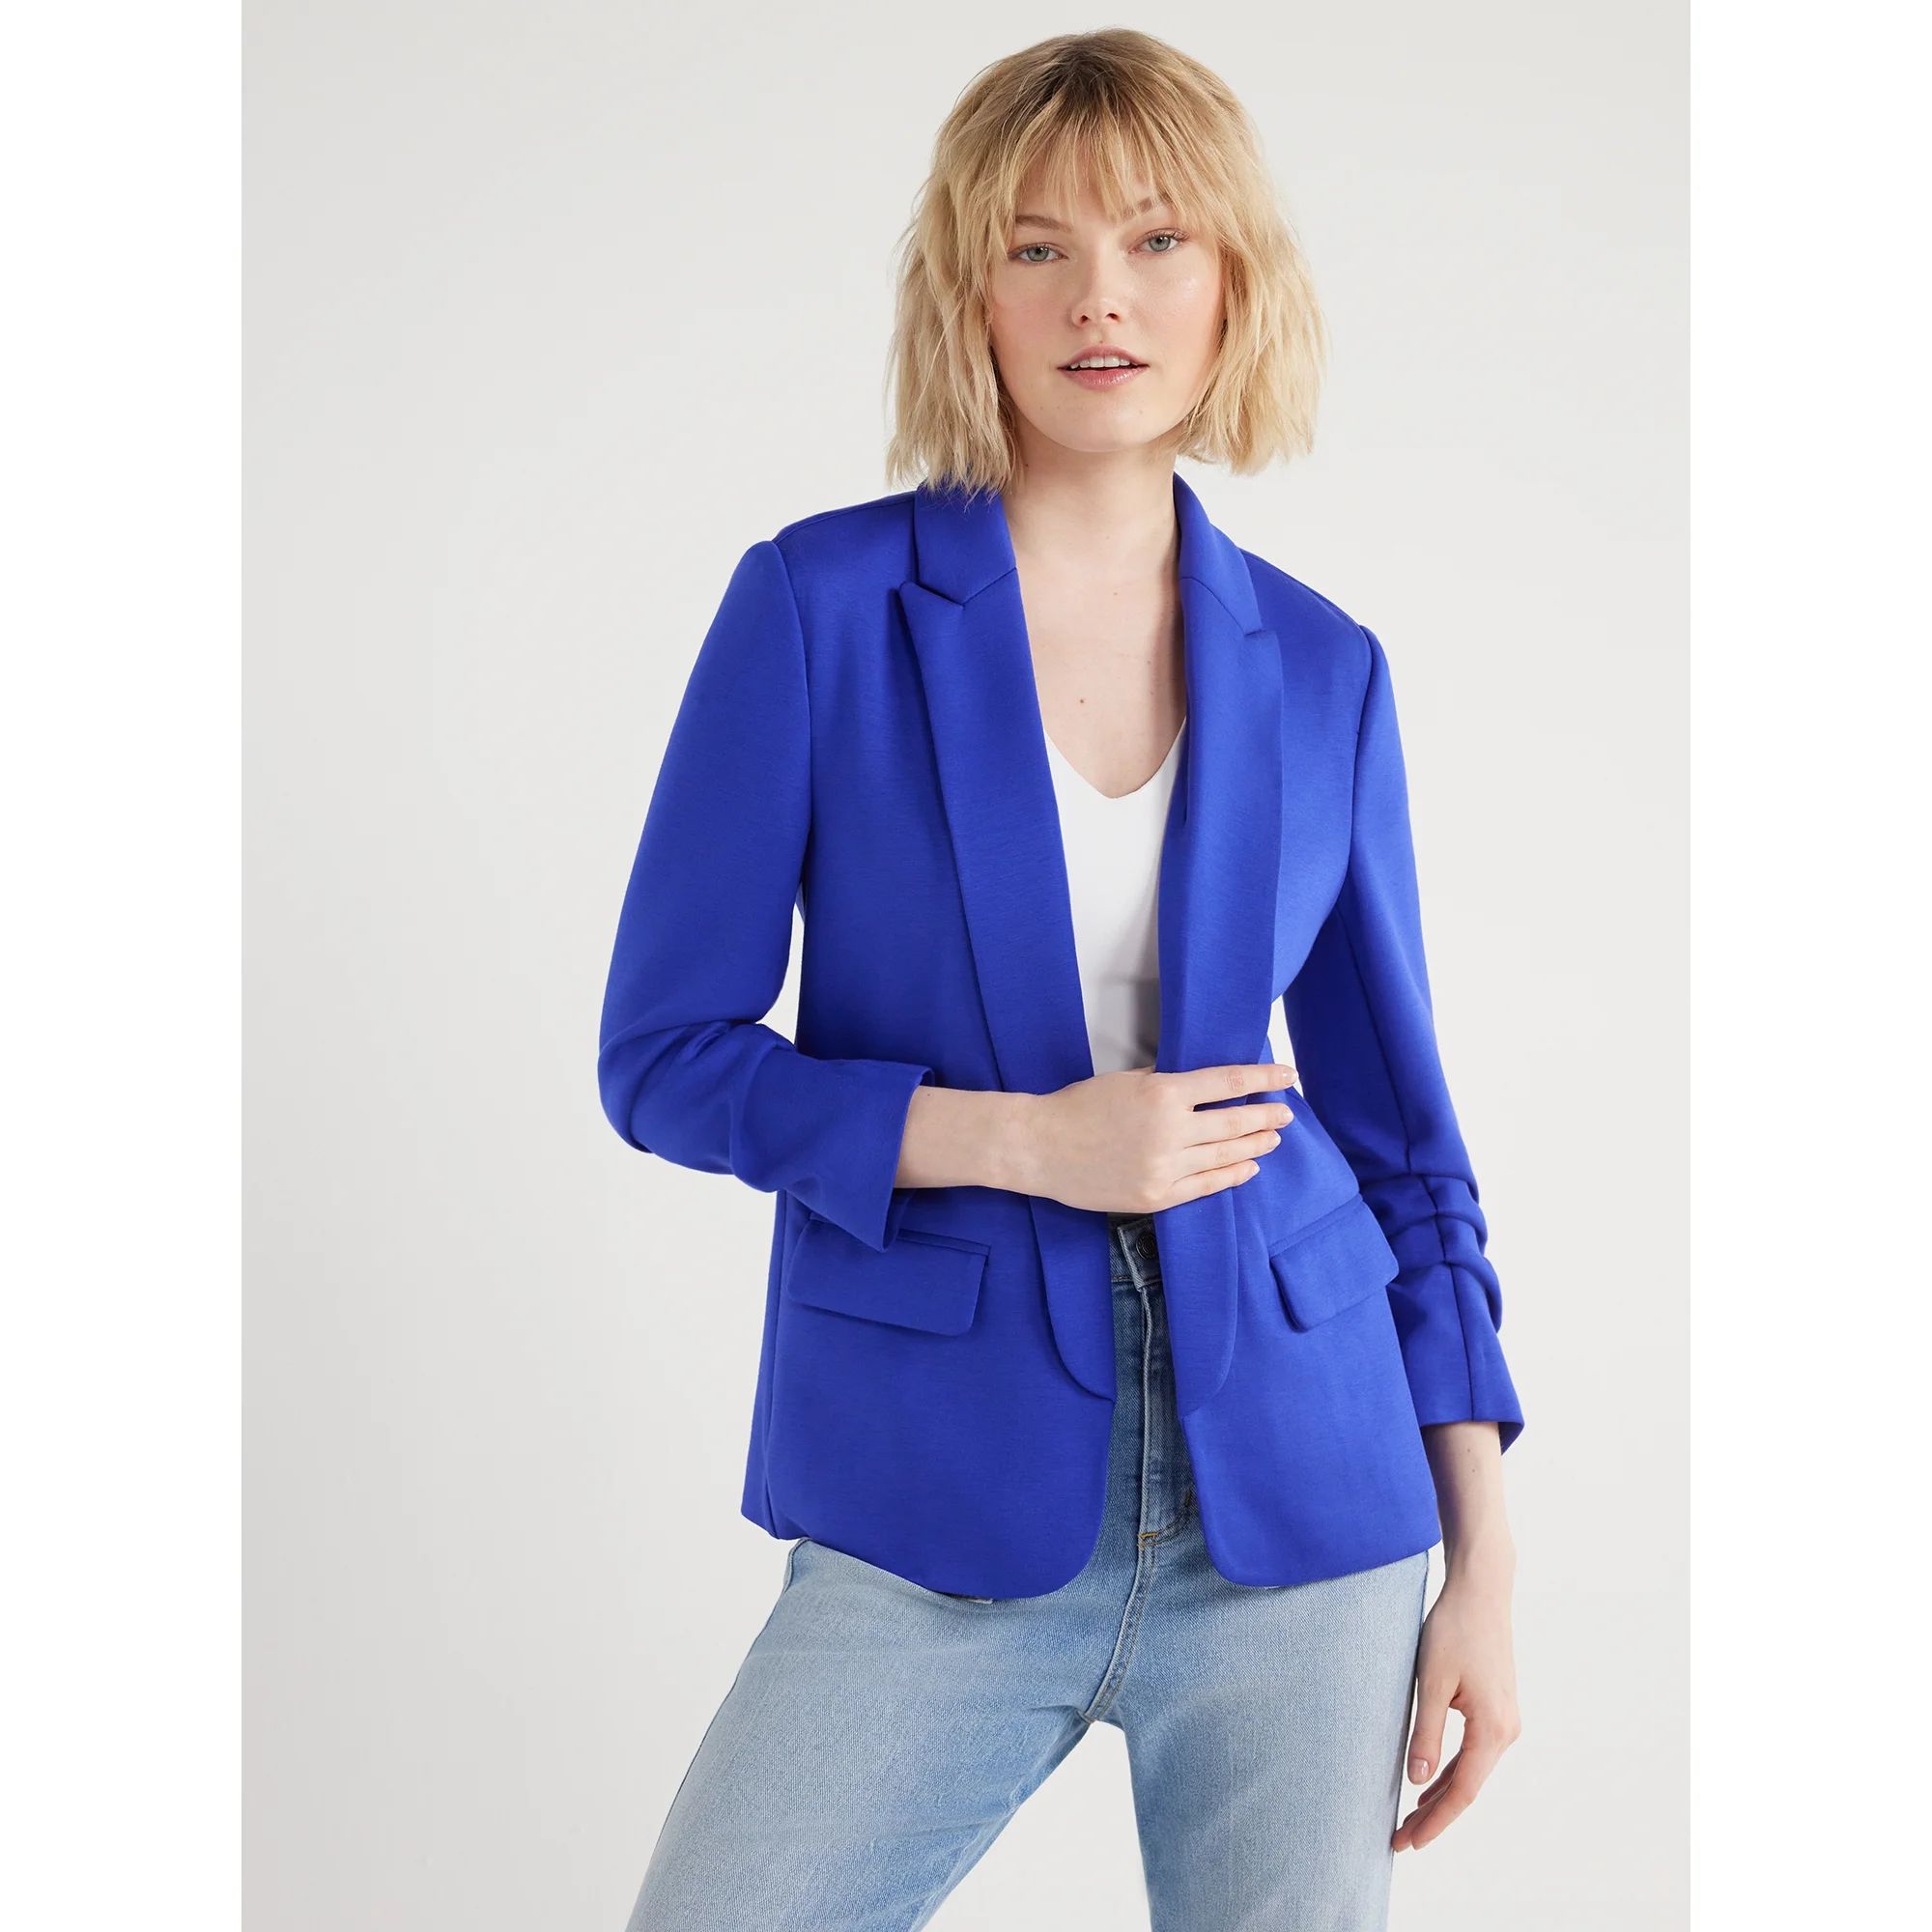 Scoop Women's Relaxed Ultimate ScubaKnit Stretch Blazer with Scrunch Sleeves, Sizes XS-XXL | Walmart (US)